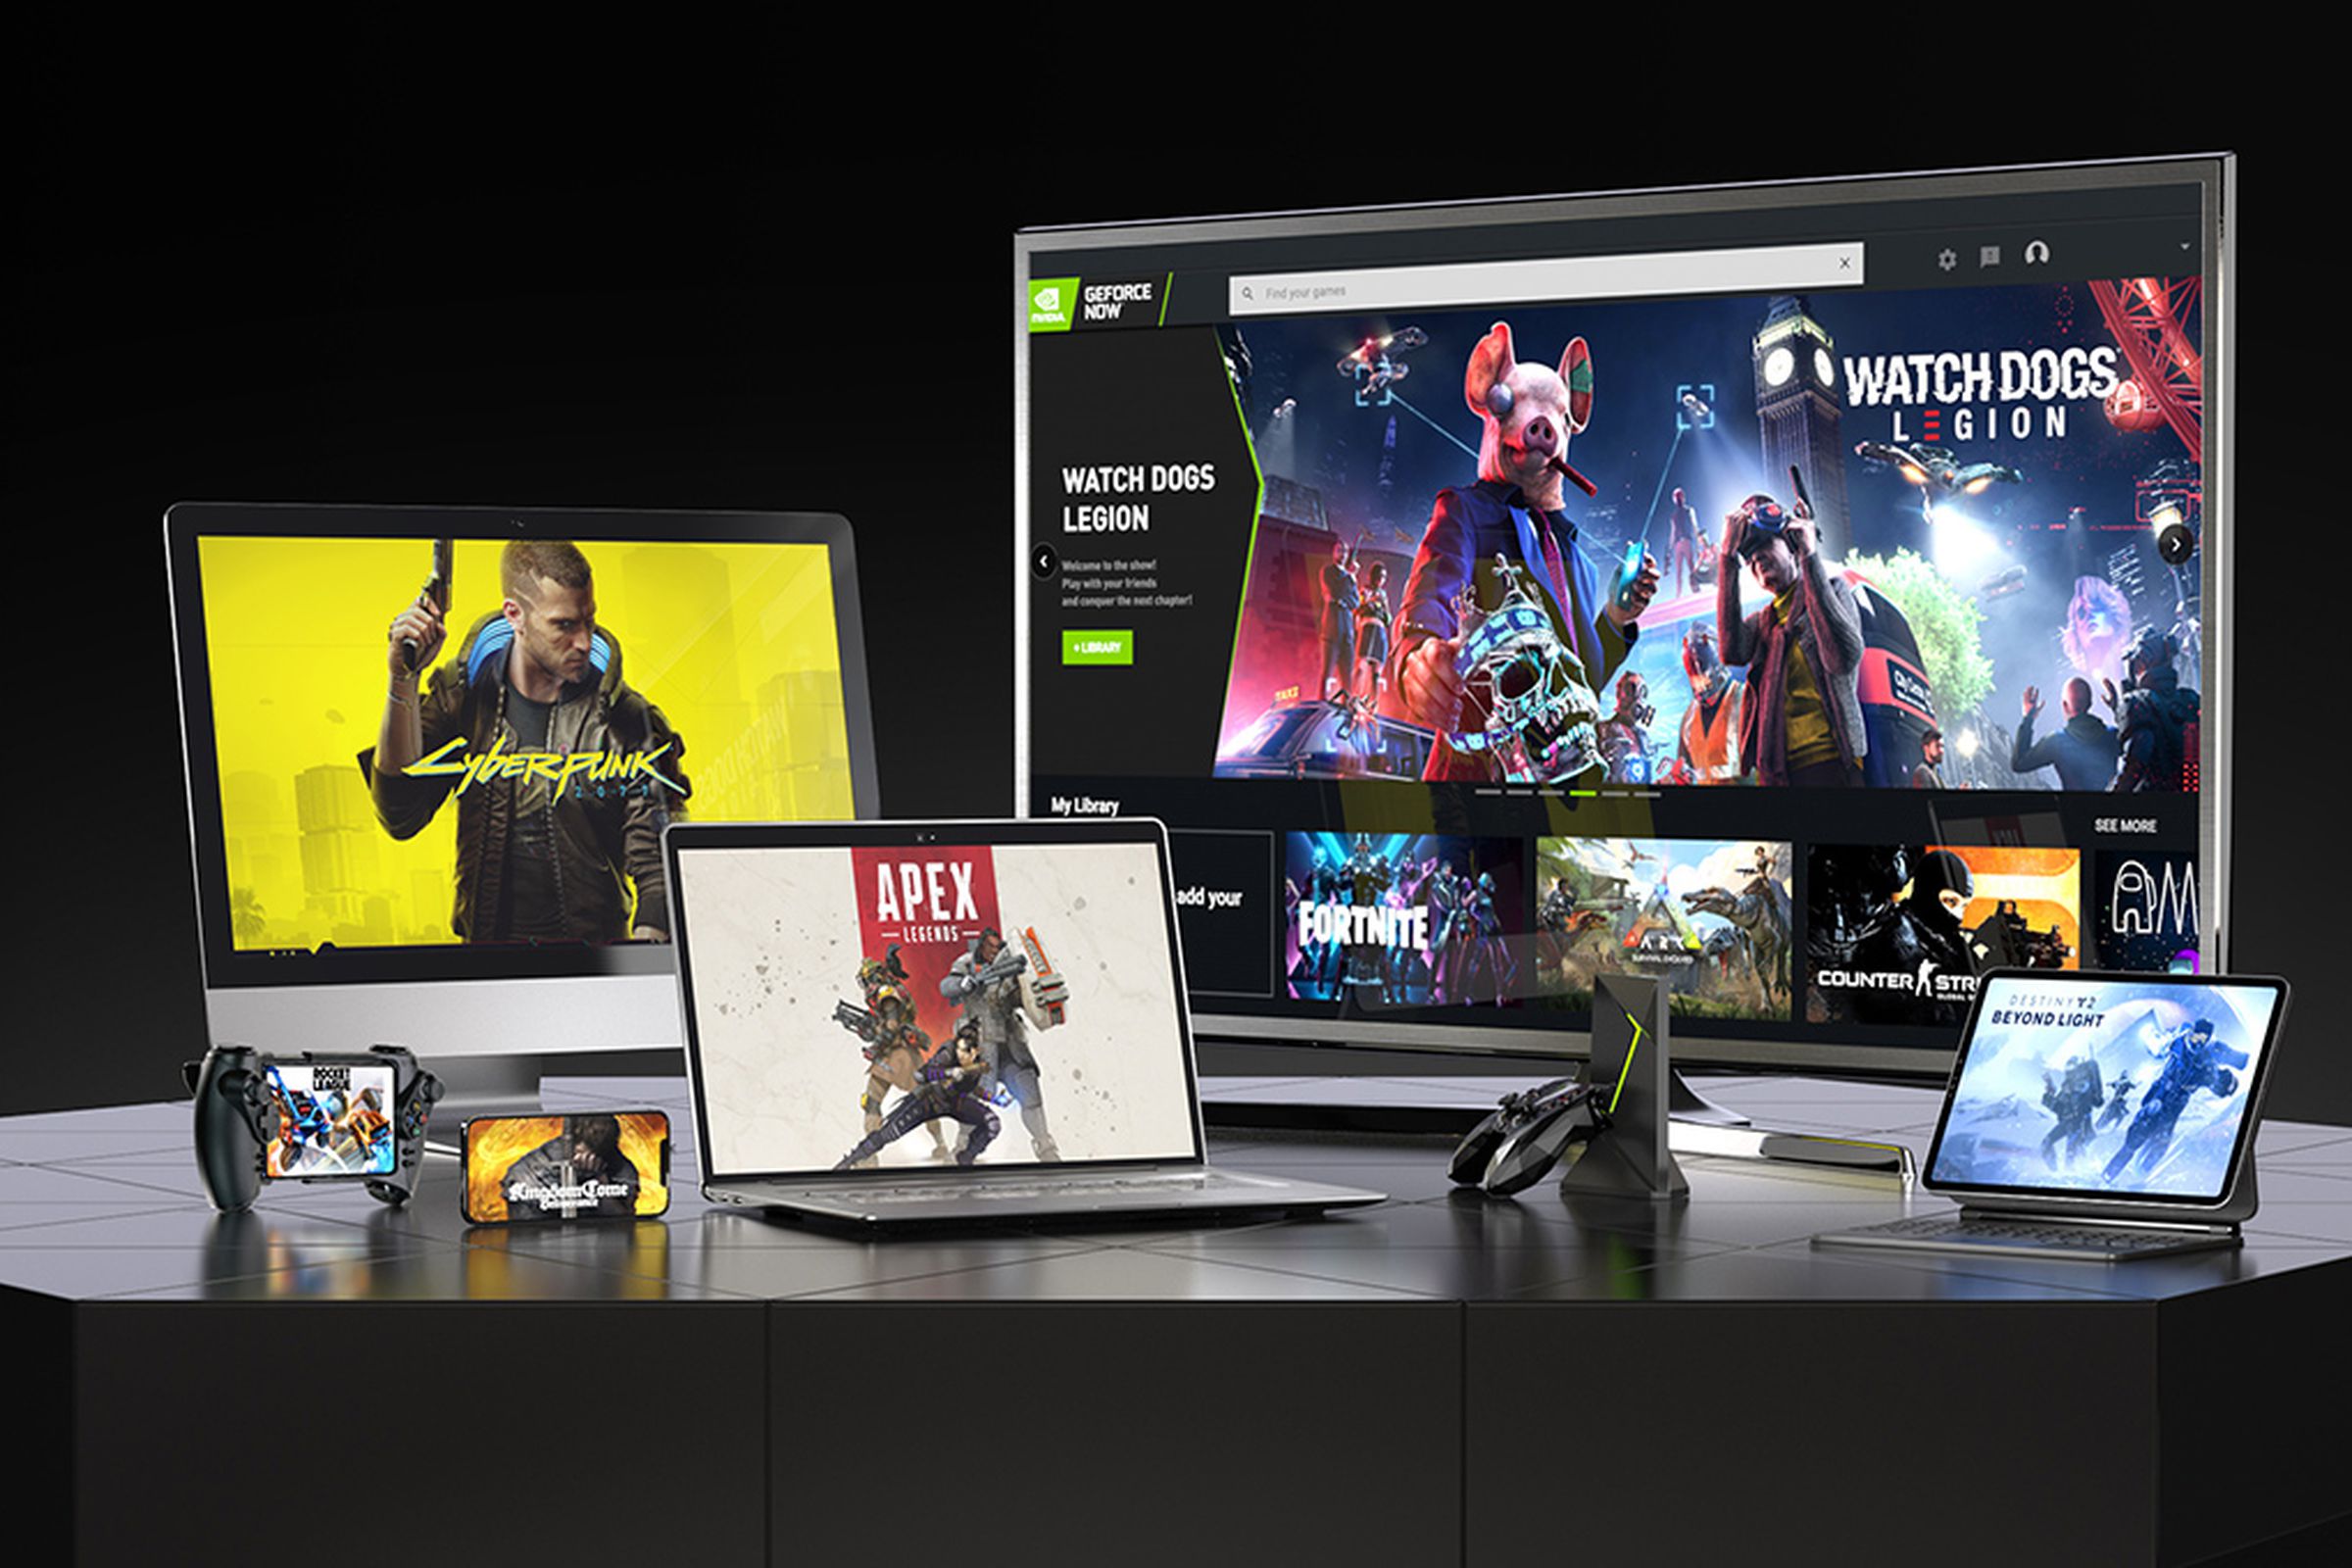 Nvidia’s GeForce Now is a cloud gaming platform that spans many devices.